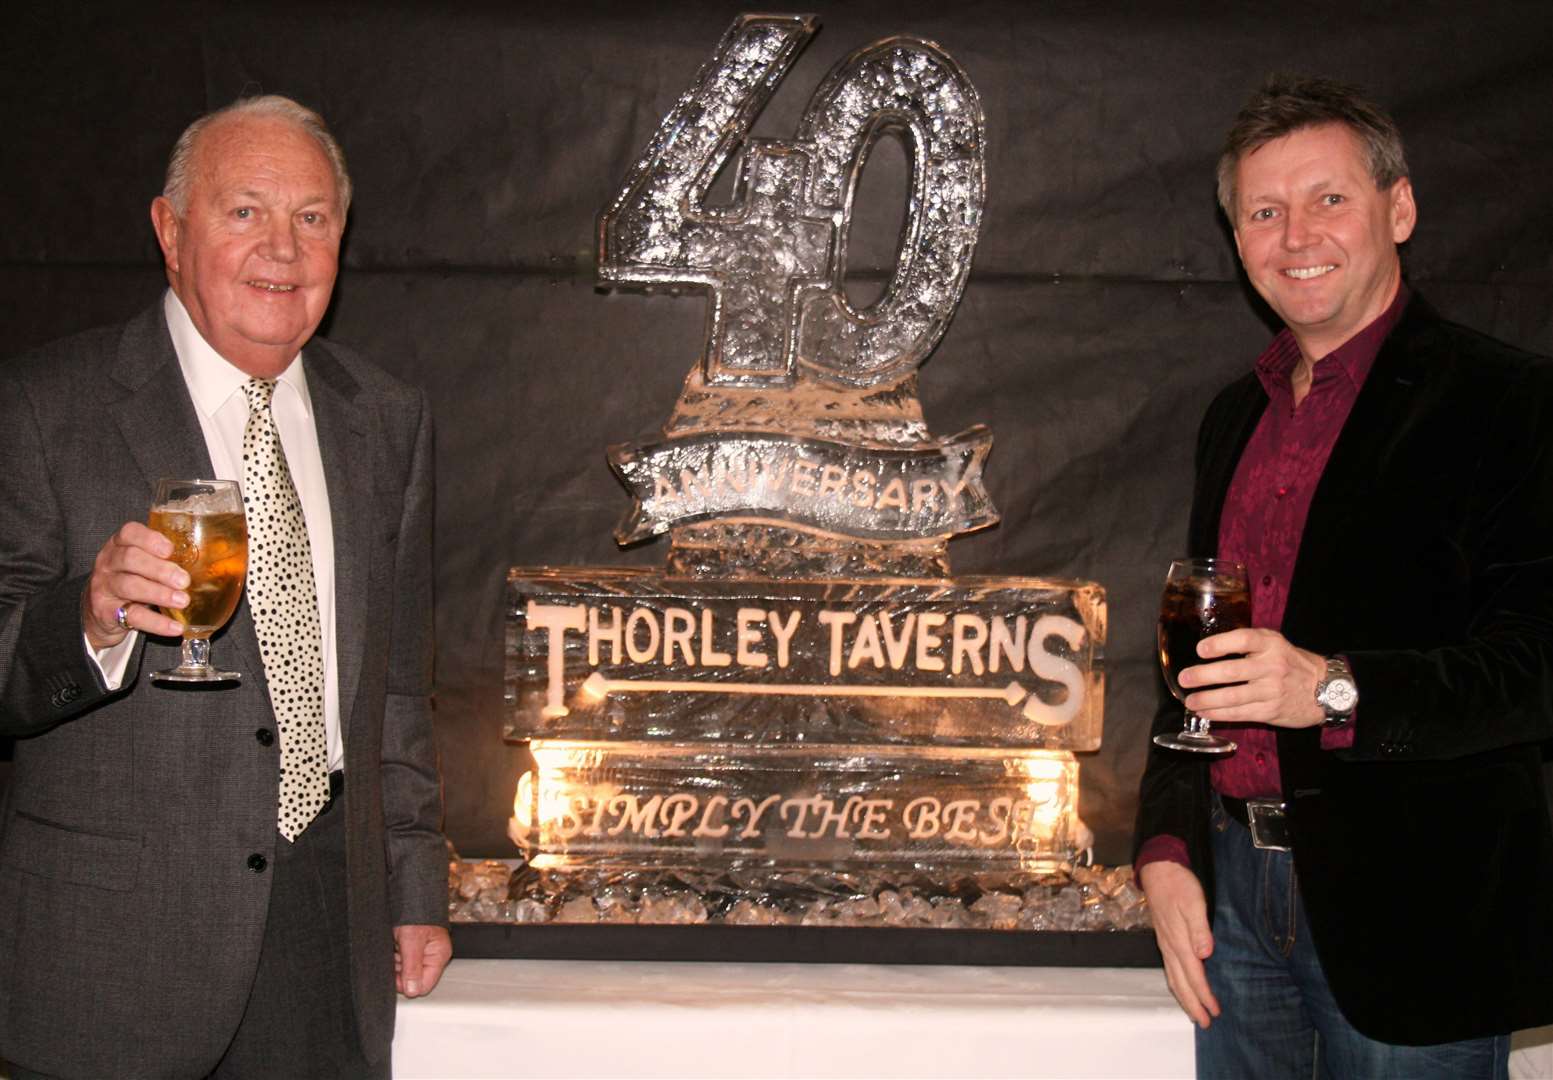 Frank Thorley and son Phil Thorley raise a glass to celebrate the 40th anniversary of Thorley Taverns in 2011